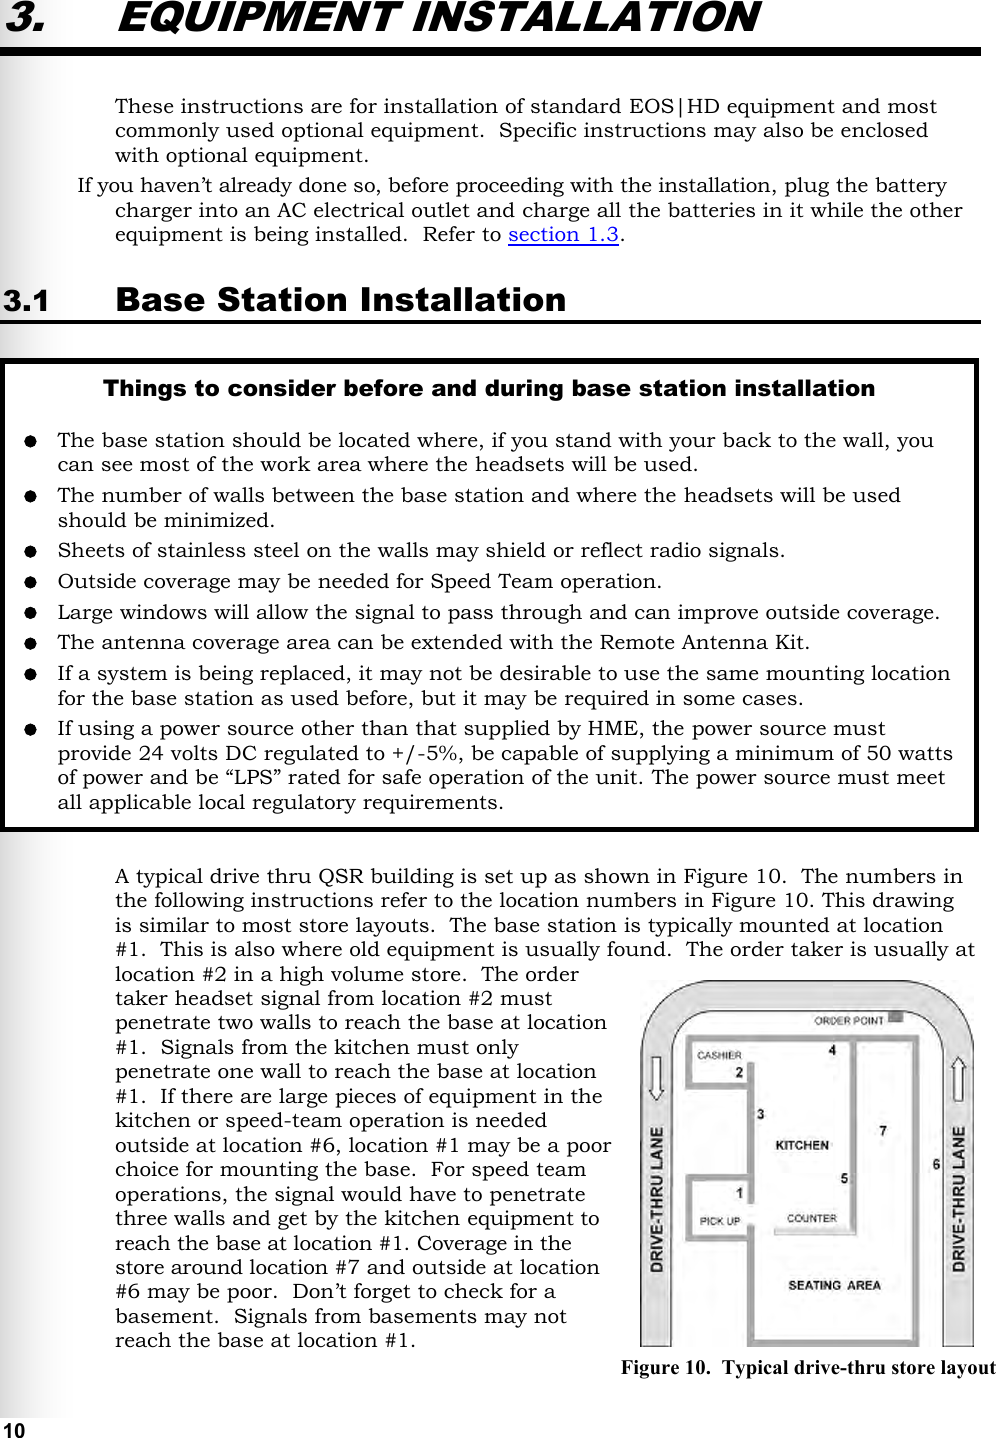   10 Figure 10.  Typical drive-thru store layout 3. EQUIPMENT INSTALLATION These instructions are for installation of standard EOS|HD equipment and most commonly used optional equipment.  Specific instructions may also be enclosed with optional equipment. If you haven’t already done so, before proceeding with the installation, plug the battery charger into an AC electrical outlet and charge all the batteries in it while the other equipment is being installed.  Refer to section 1.3. 3.1 Base Station Installation  A typical drive thru QSR building is set up as shown in Figure 10.  The numbers in the following instructions refer to the location numbers in Figure 10. This drawing is similar to most store layouts.  The base station is typically mounted at location #1.  This is also where old equipment is usually found.  The order taker is usually at location #2 in a high volume store.  The order taker headset signal from location #2 must penetrate two walls to reach the base at location #1.  Signals from the kitchen must only penetrate one wall to reach the base at location #1.  If there are large pieces of equipment in the kitchen or speed-team operation is needed outside at location #6, location #1 may be a poor choice for mounting the base.  For speed team operations, the signal would have to penetrate three walls and get by the kitchen equipment to reach the base at location #1. Coverage in the store around location #7 and outside at location #6 may be poor.  Don’t forget to check for a basement.  Signals from basements may not reach the base at location #1. Things to consider before and during base station installation   The base station should be located where, if you stand with your back to the wall, you can see most of the work area where the headsets will be used.  The number of walls between the base station and where the headsets will be used should be minimized.  Sheets of stainless steel on the walls may shield or reflect radio signals.  Outside coverage may be needed for Speed Team operation.   Large windows will allow the signal to pass through and can improve outside coverage.   The antenna coverage area can be extended with the Remote Antenna Kit.  If a system is being replaced, it may not be desirable to use the same mounting location for the base station as used before, but it may be required in some cases.  If using a power source other than that supplied by HME, the power source must provide 24 volts DC regulated to +/-5%, be capable of supplying a minimum of 50 watts of power and be “LPS” rated for safe operation of the unit. The power source must meet all applicable local regulatory requirements.   